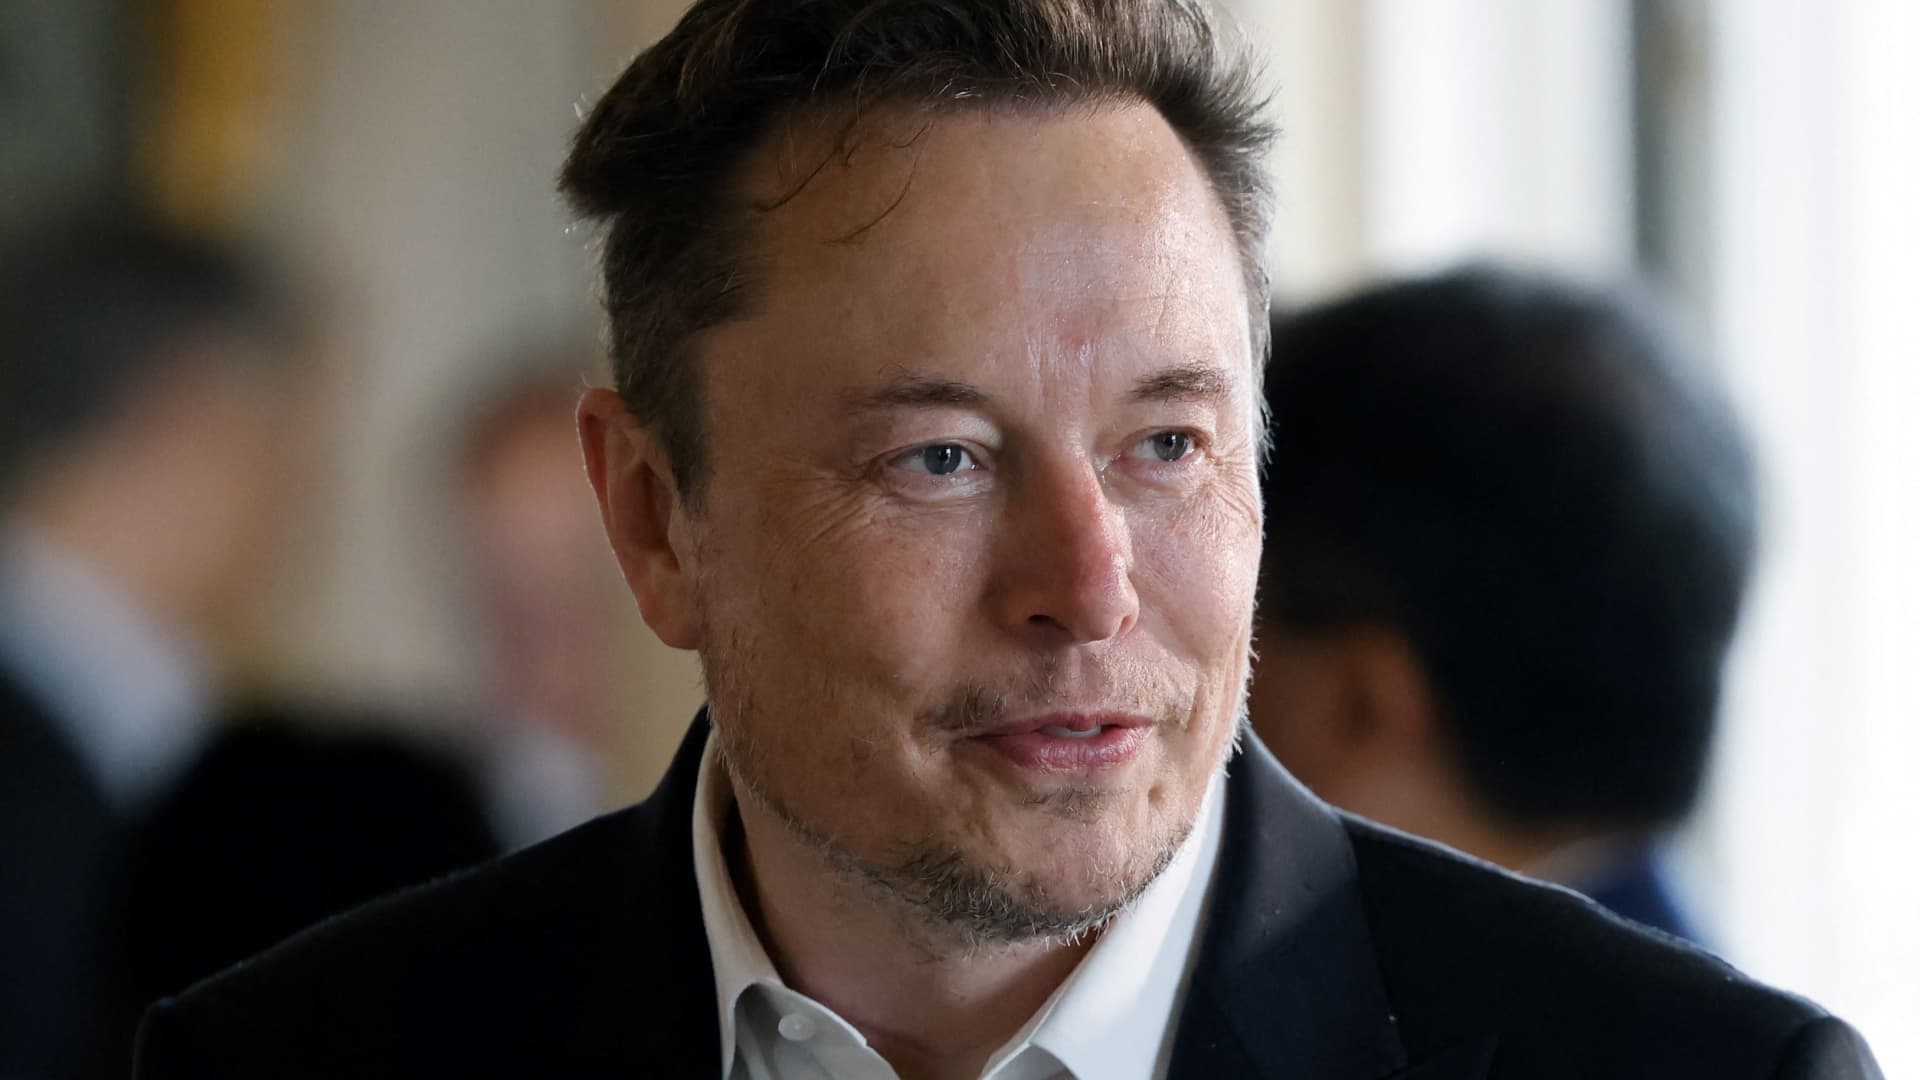 Elon Musk discussed a possible Mongolia expansion with the country's prime minister